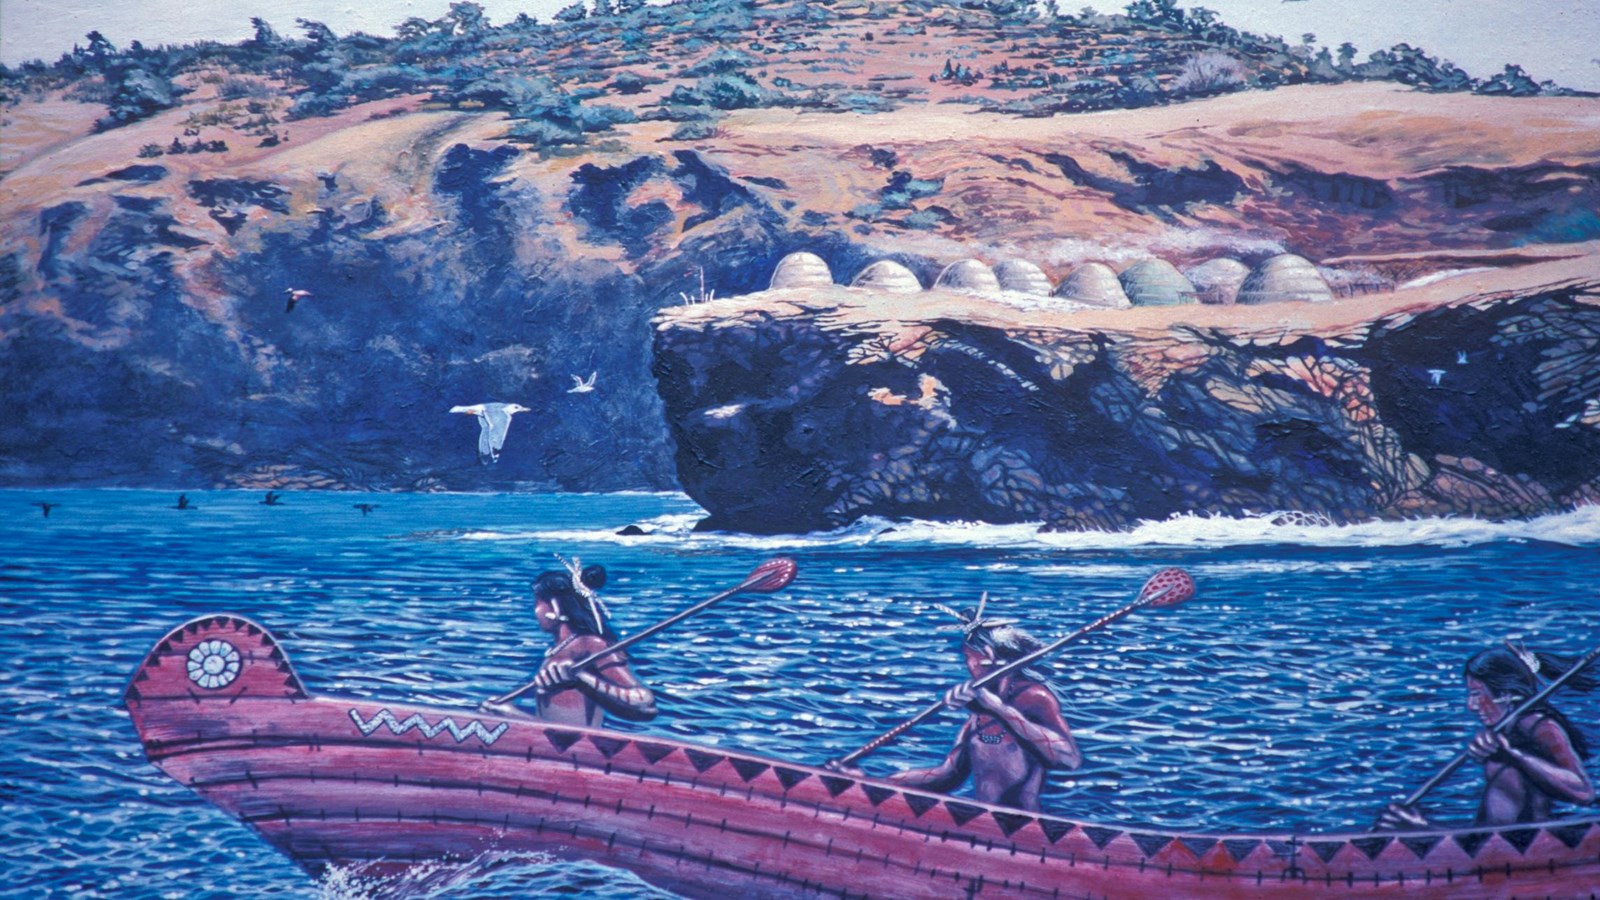 Chumash paddling a canoe off the coast of a village site. 